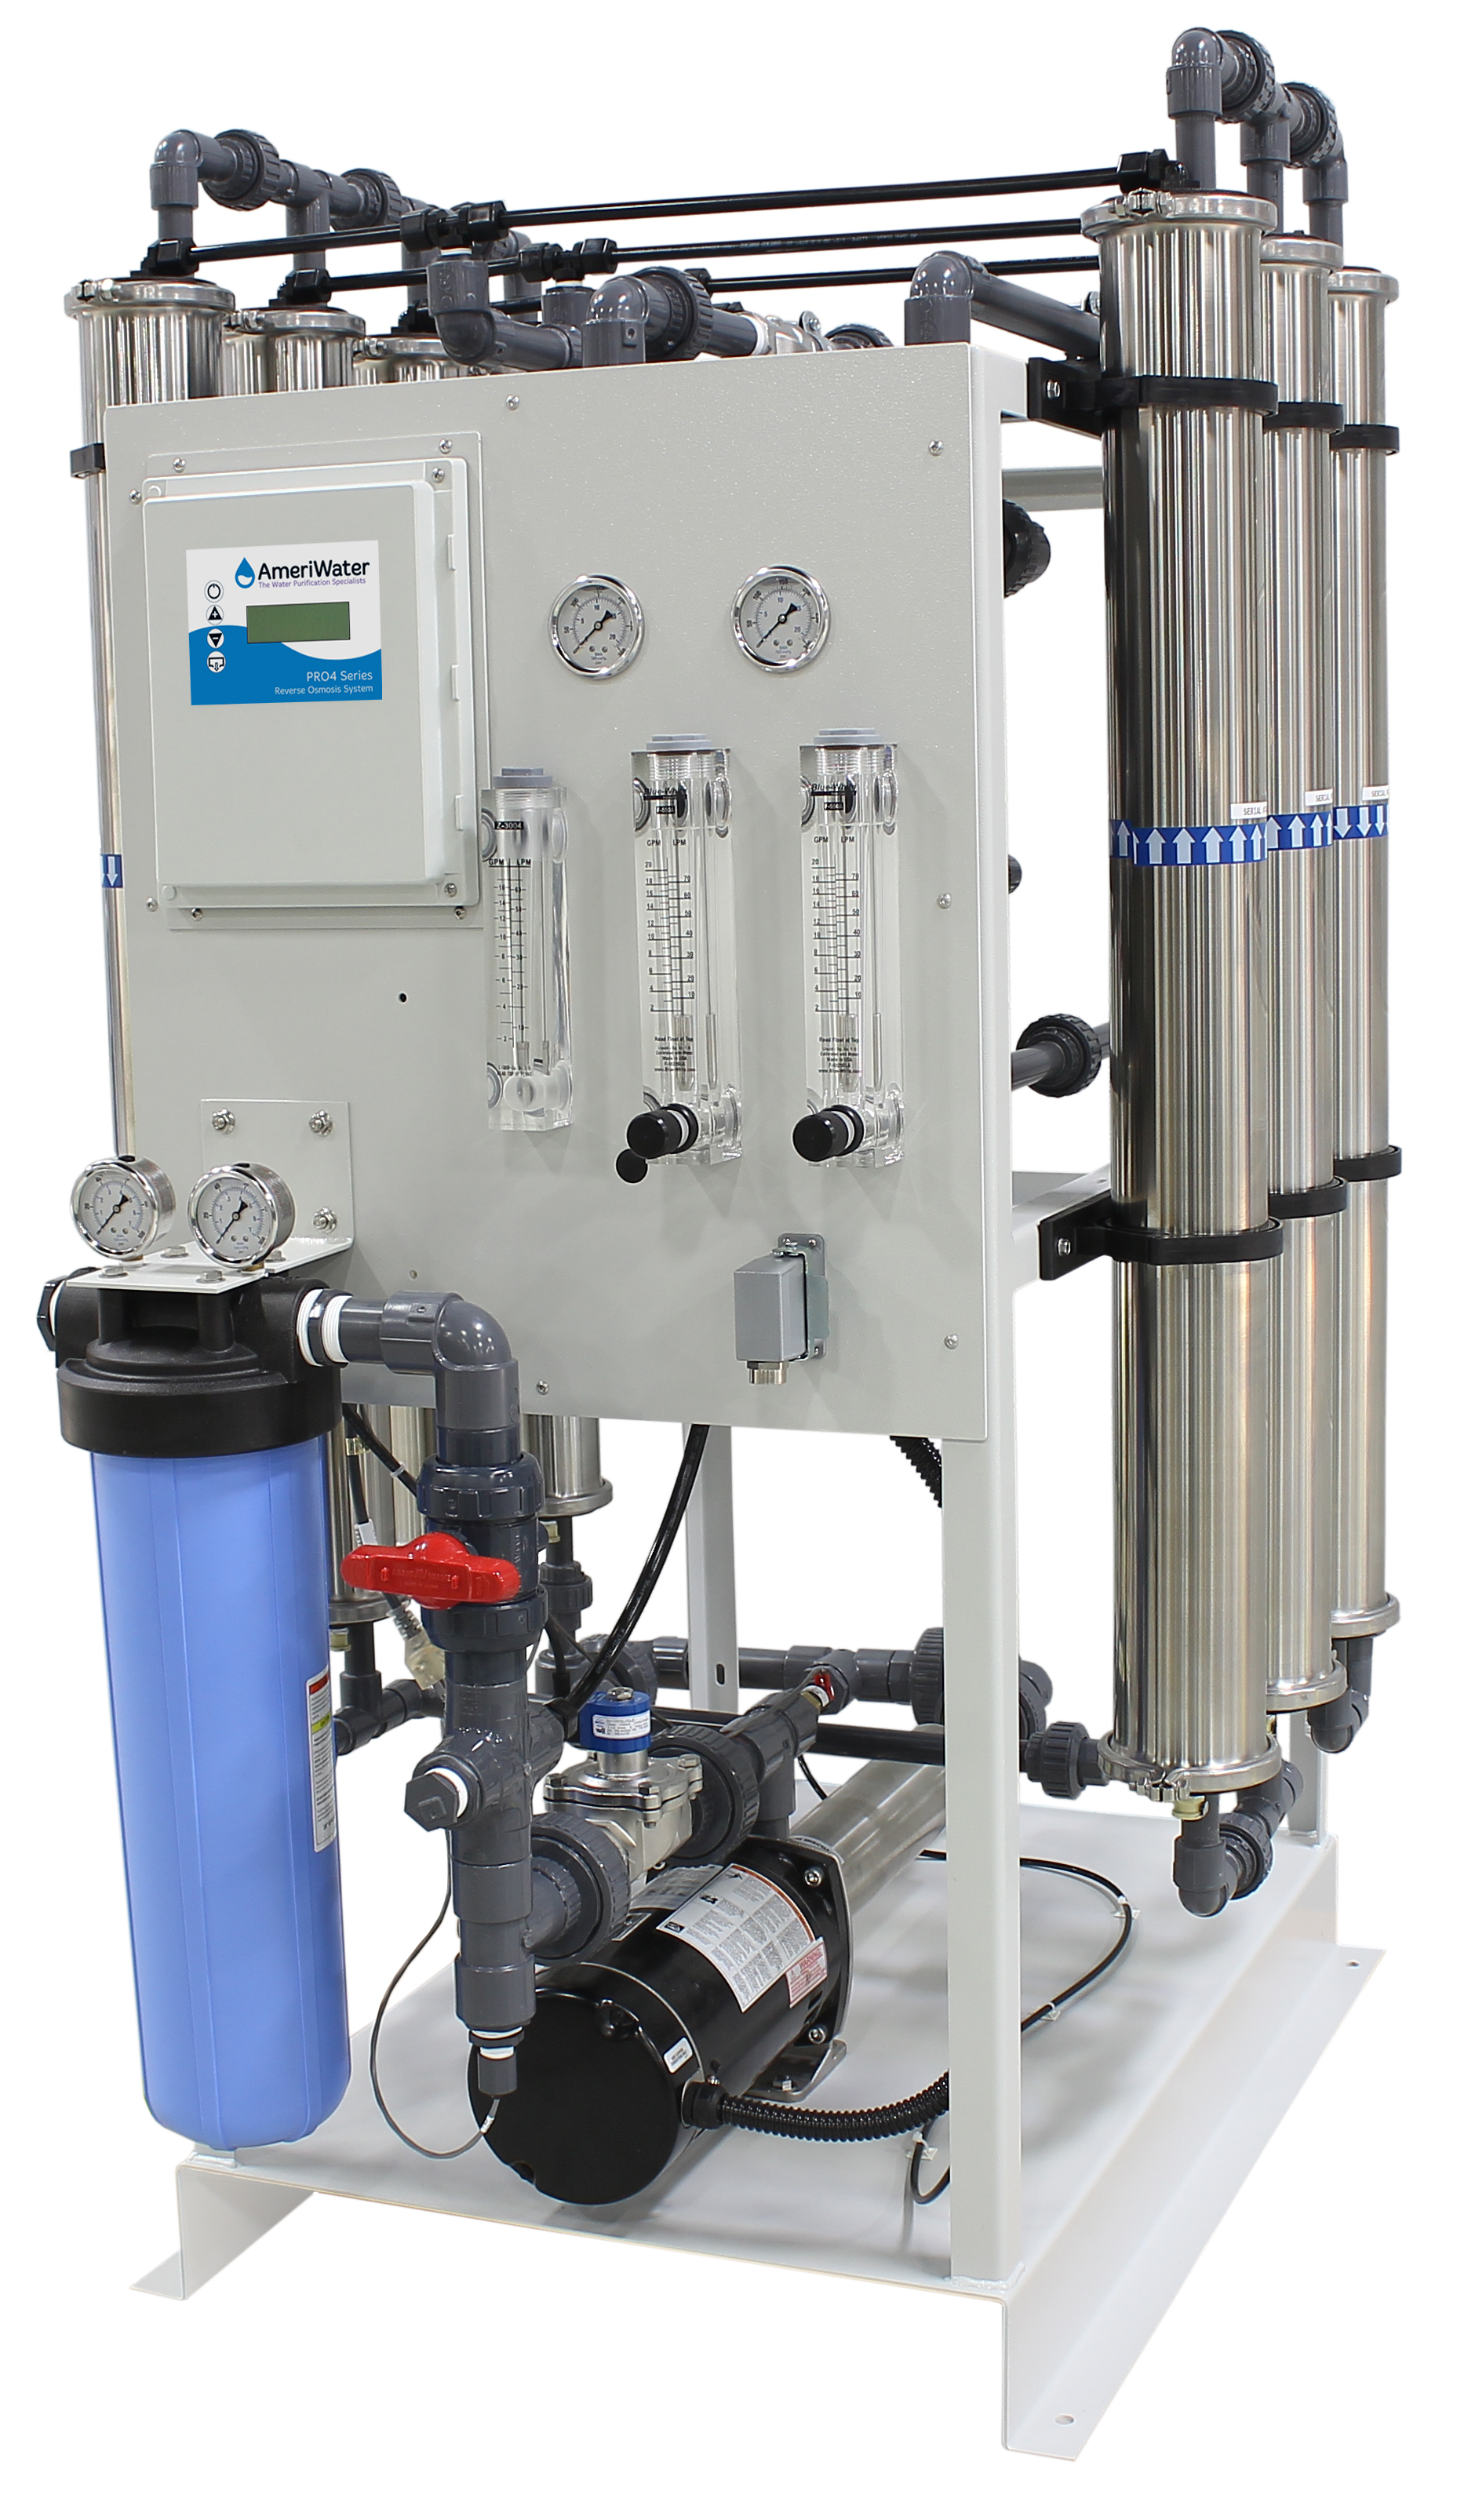 AmeriWater’s PRO4 Deluxe System.